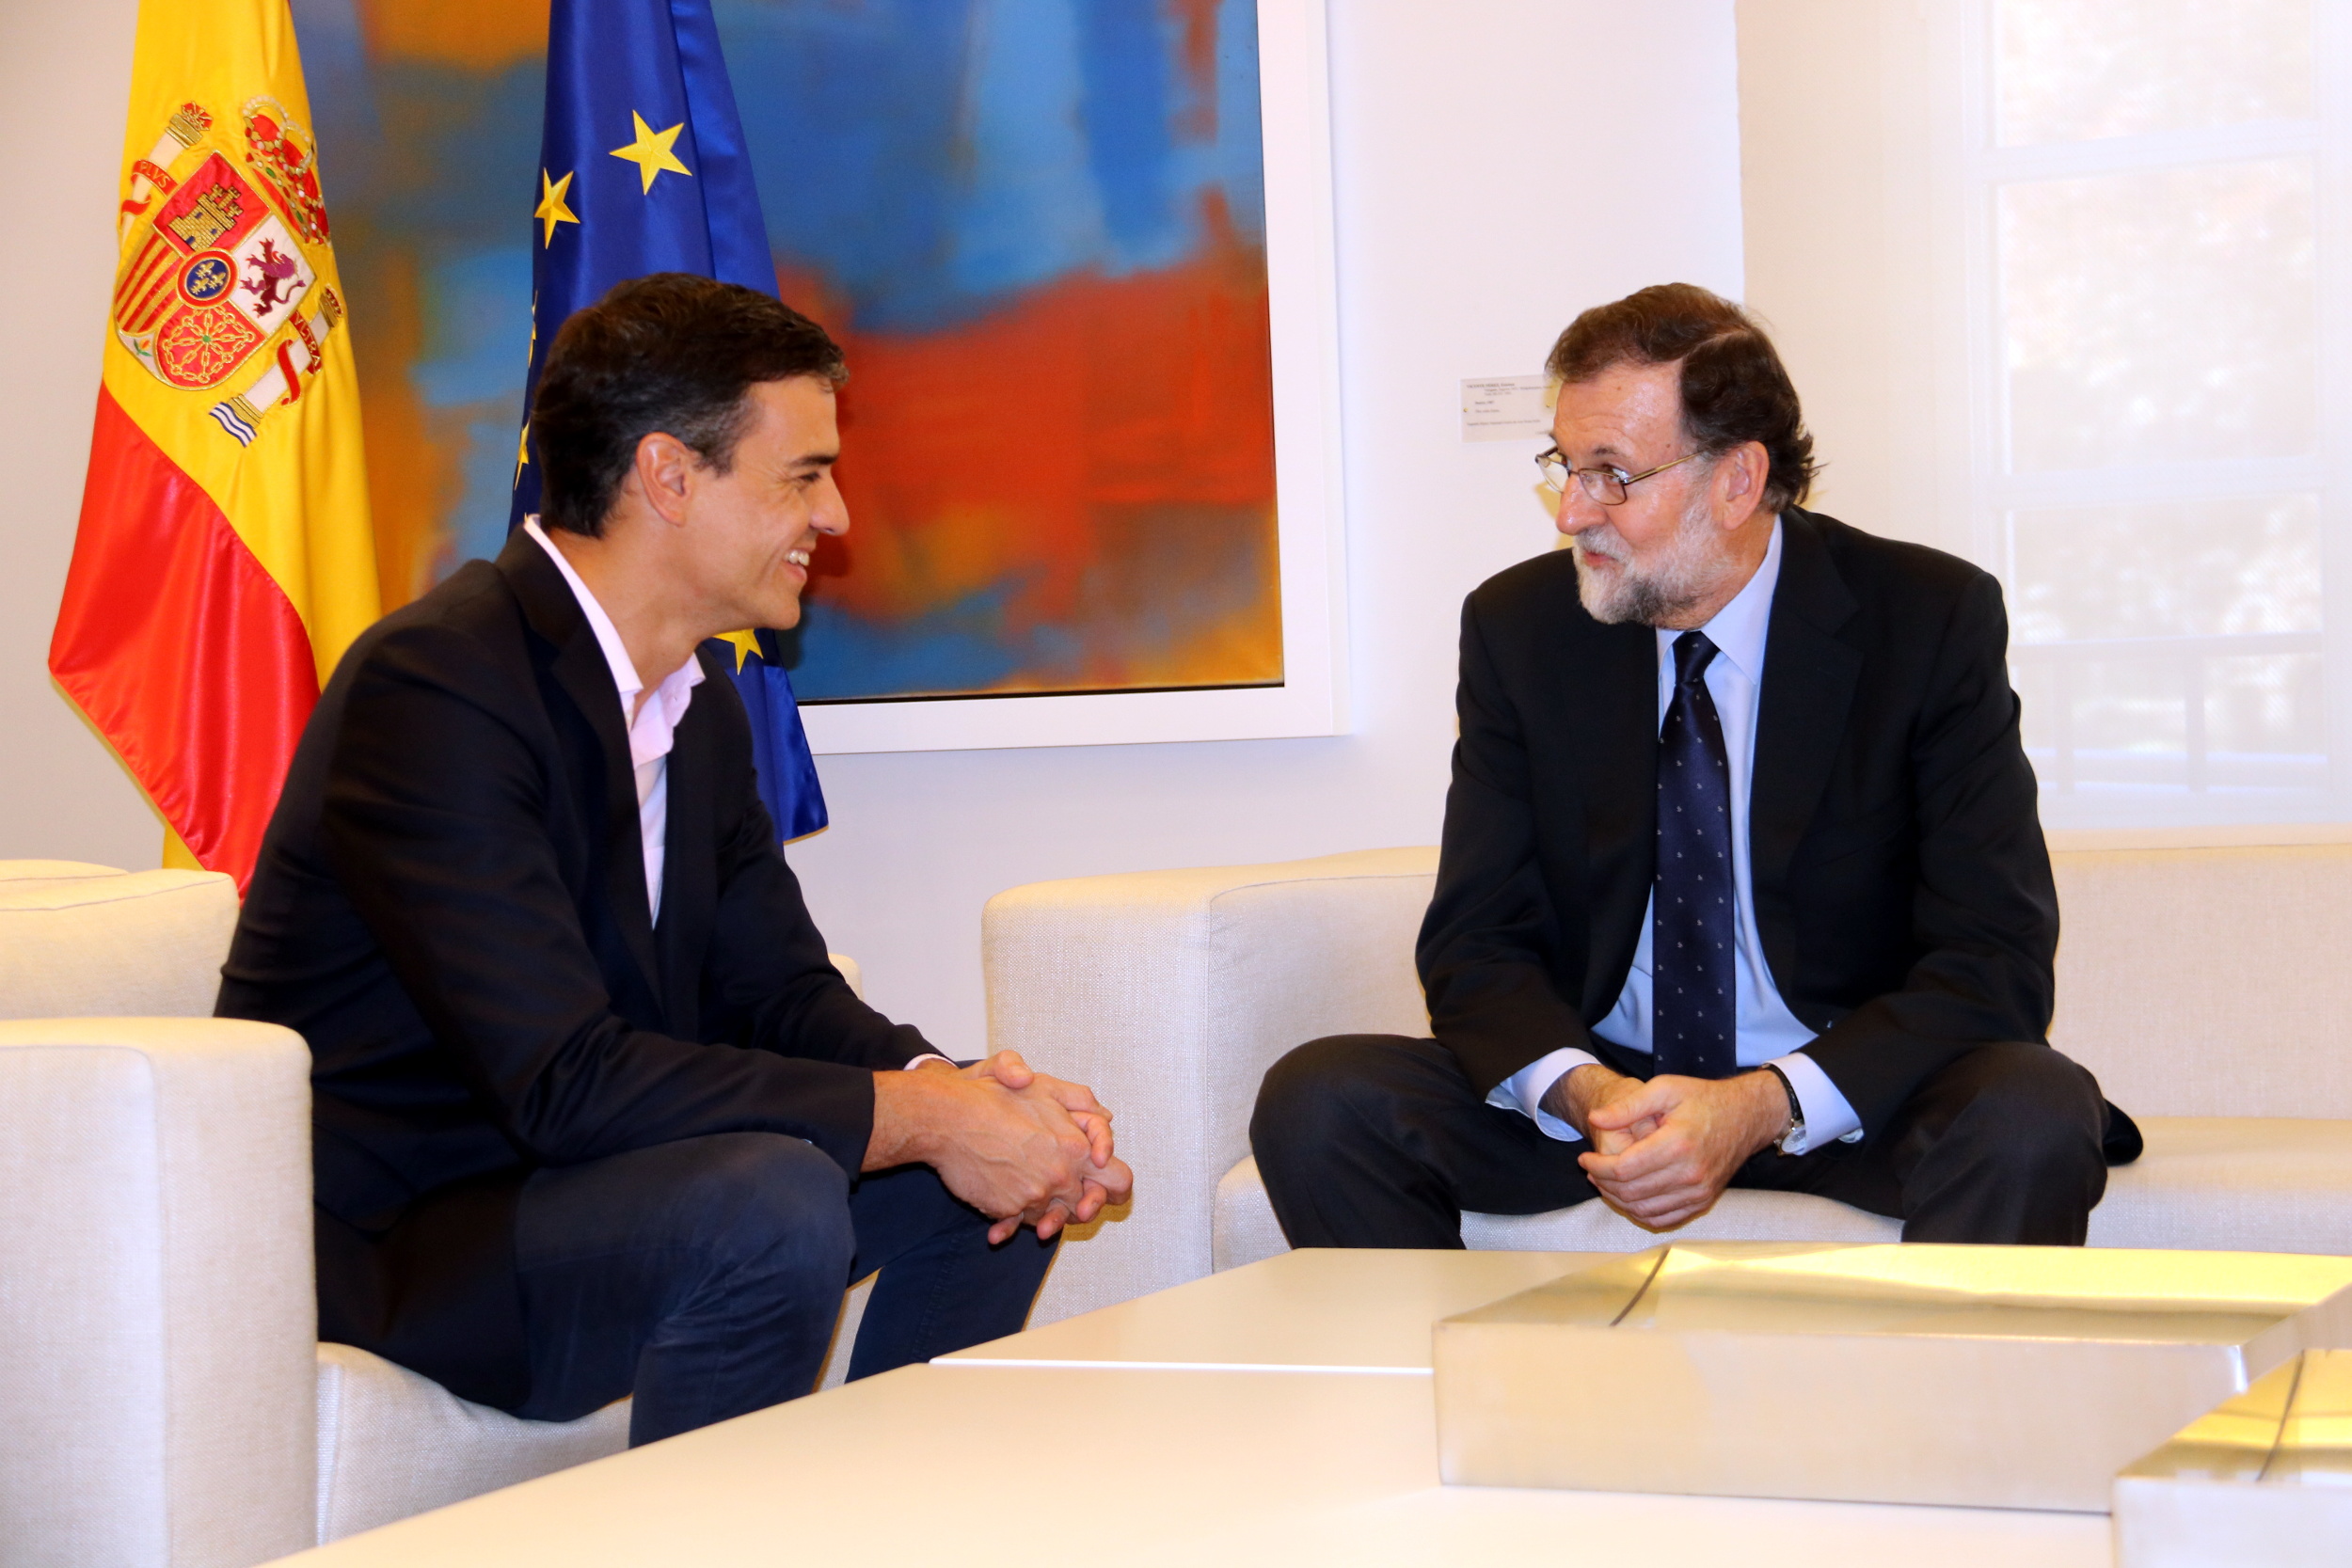 Spanish president Mariano Rajoy speaking to leader of the PSOE Pedro Sànchez ini Madrid (by Tània Tàpia)